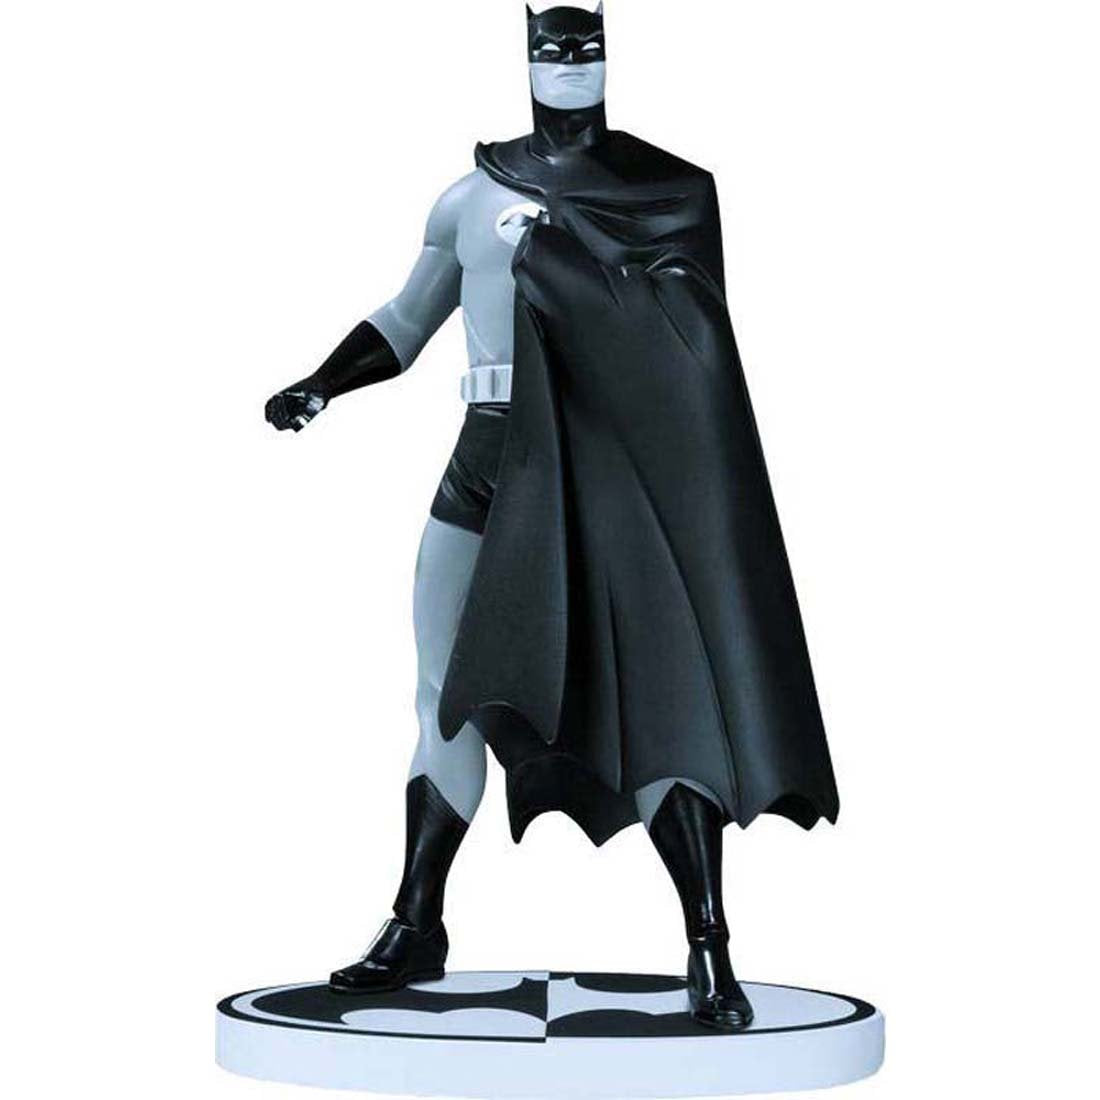 DC Collectibles Batman Black and White Batman Statue by Darwyn Cooke (Second Edition)